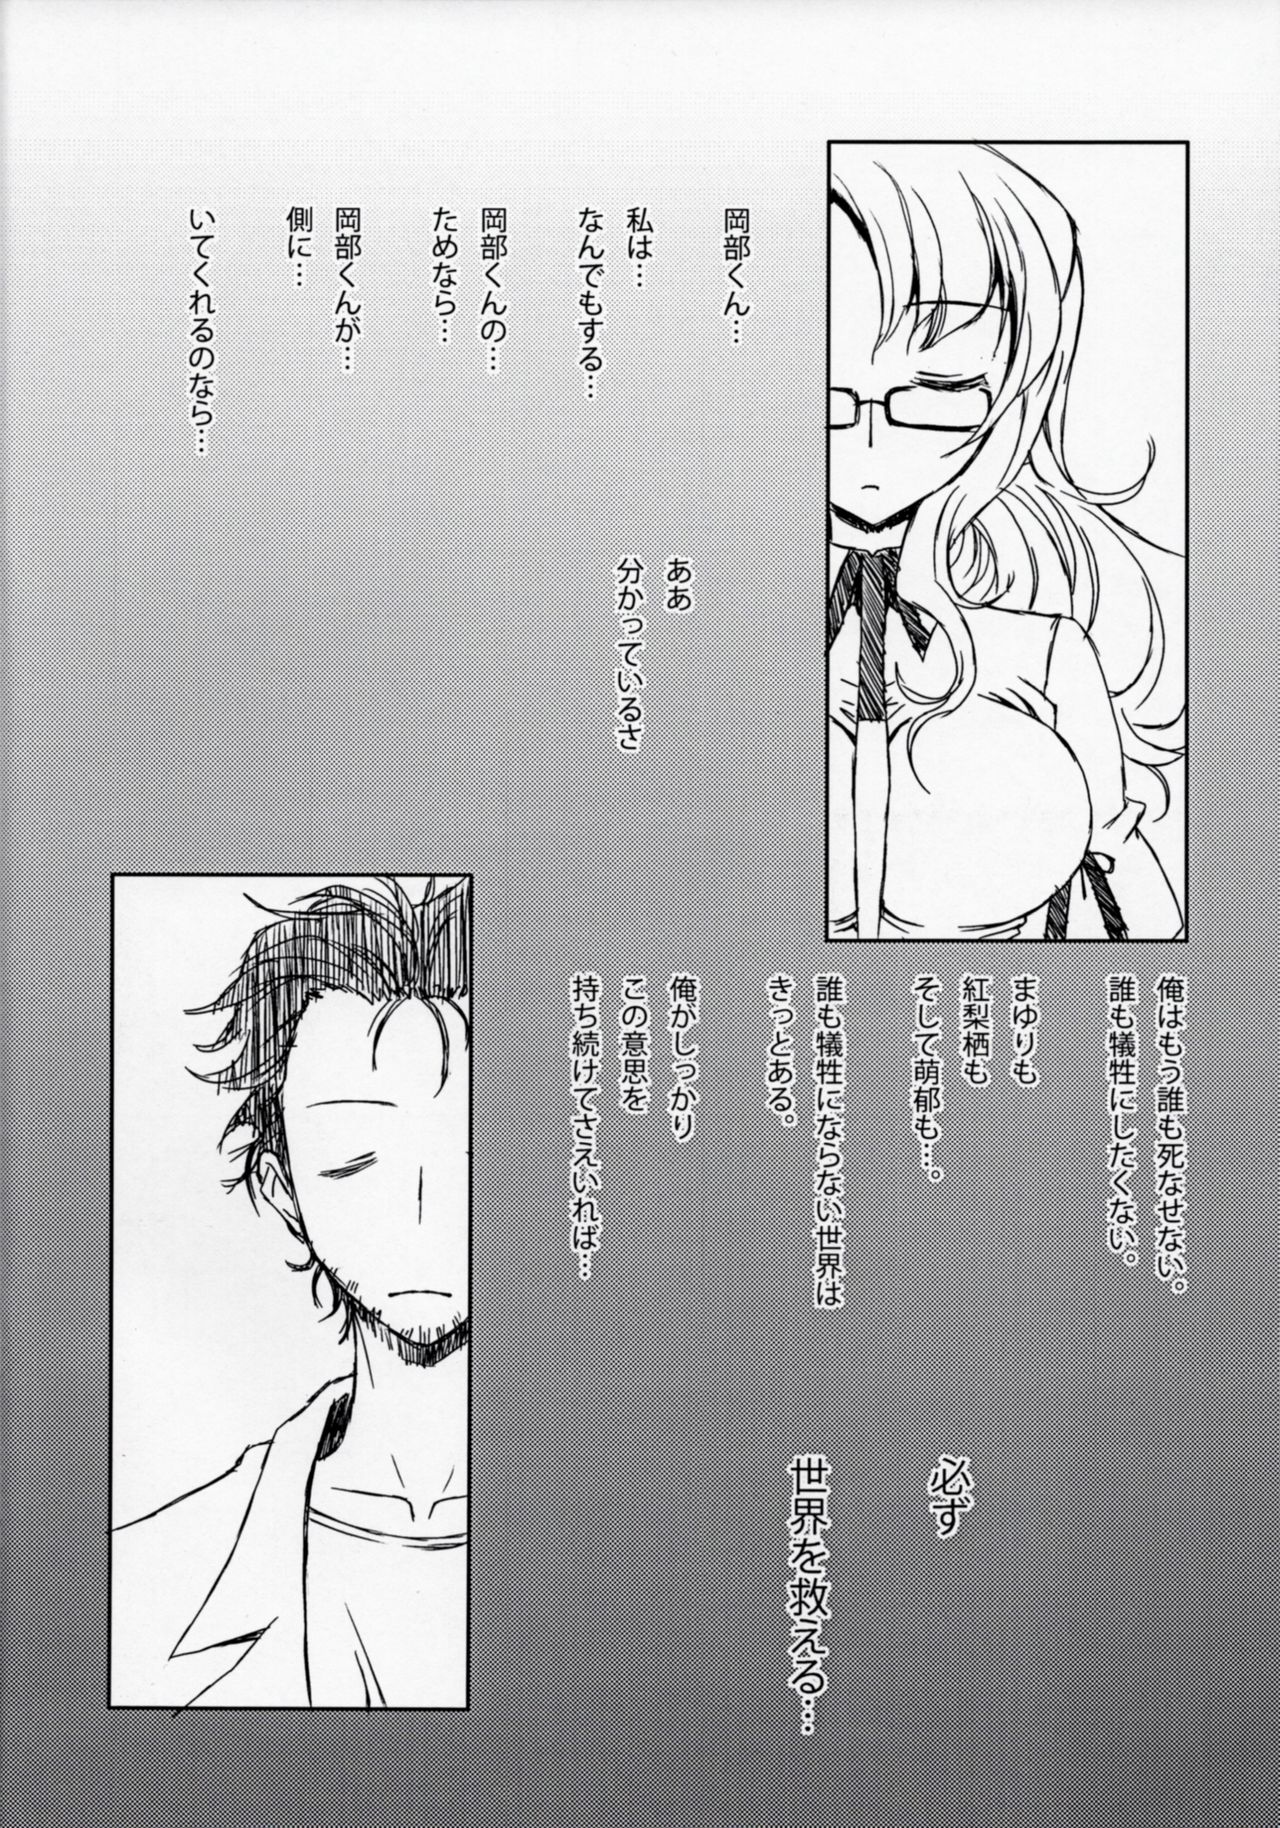 (Chaos;Gate) [LEAM26 (AXiS) Unmei Ruten no Jekyll (Steins;Gate) page 13 full